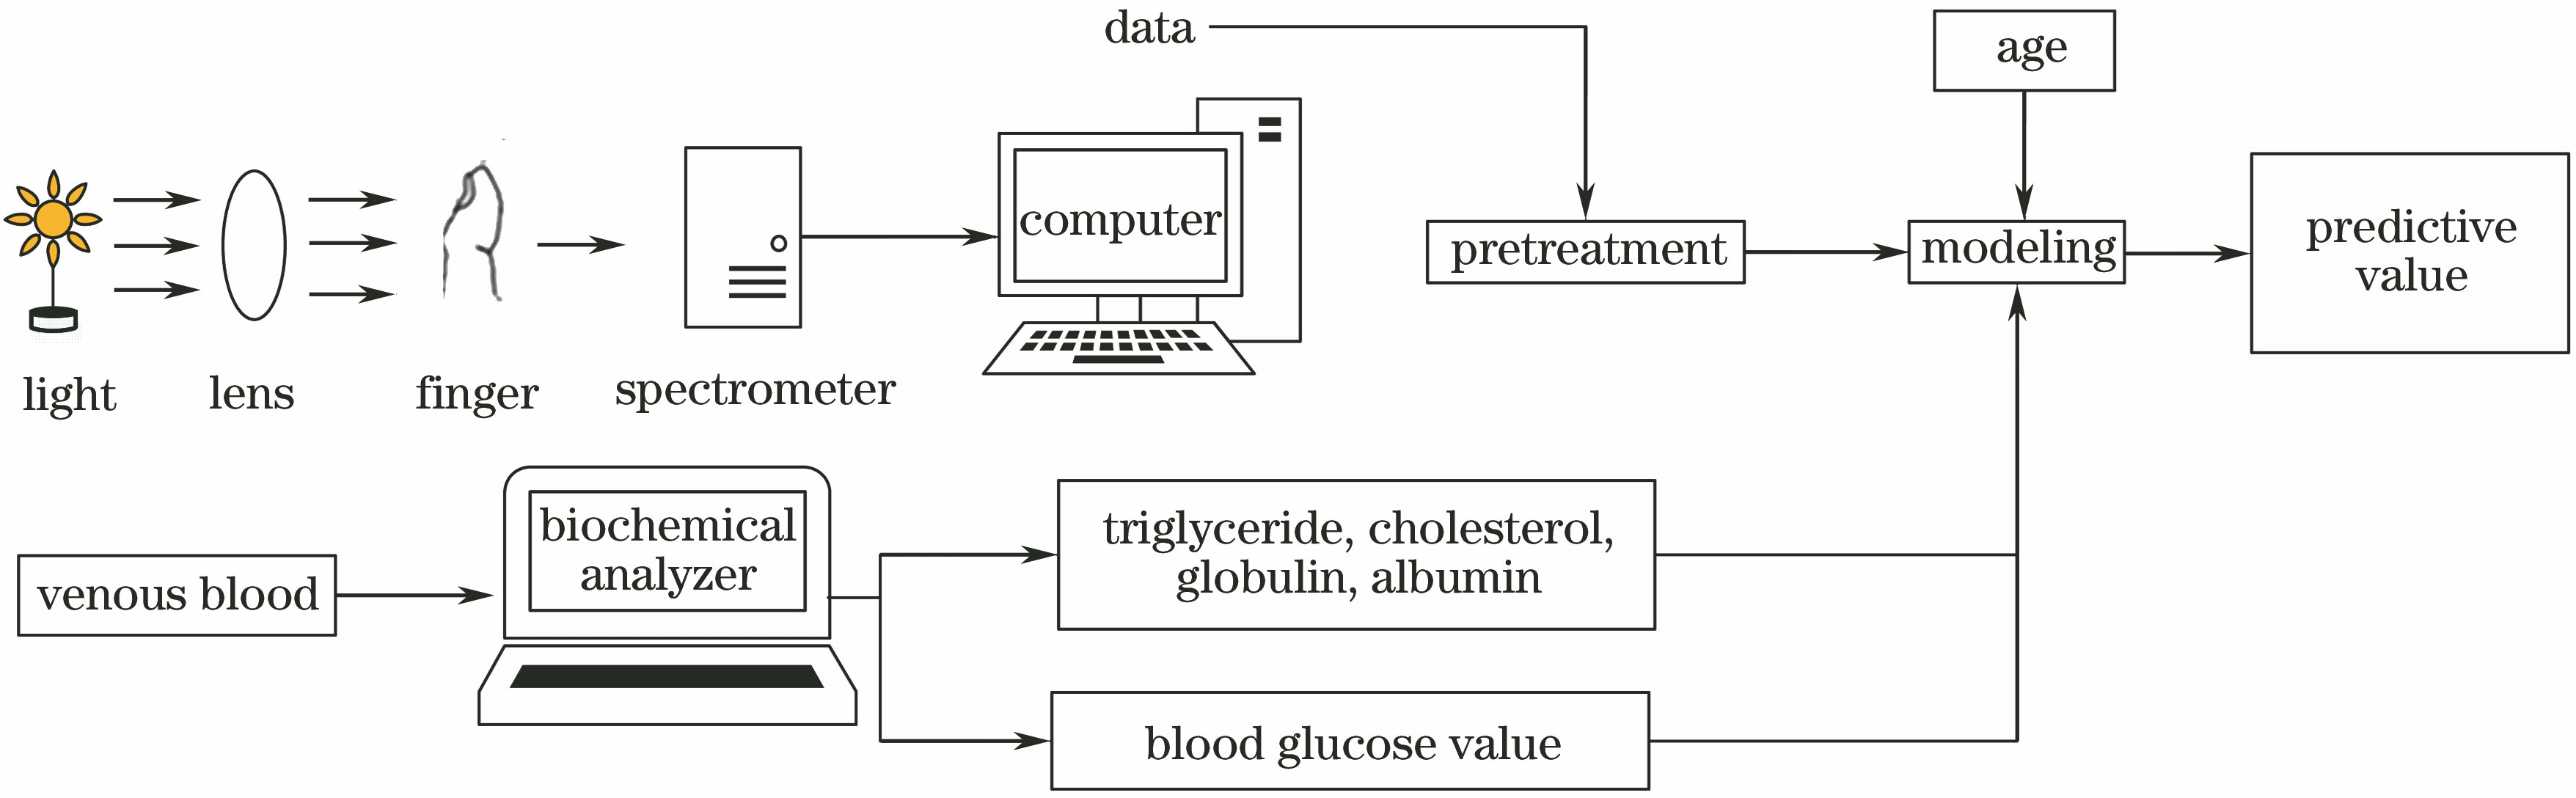 Experiment scheme for measuring blood glucose